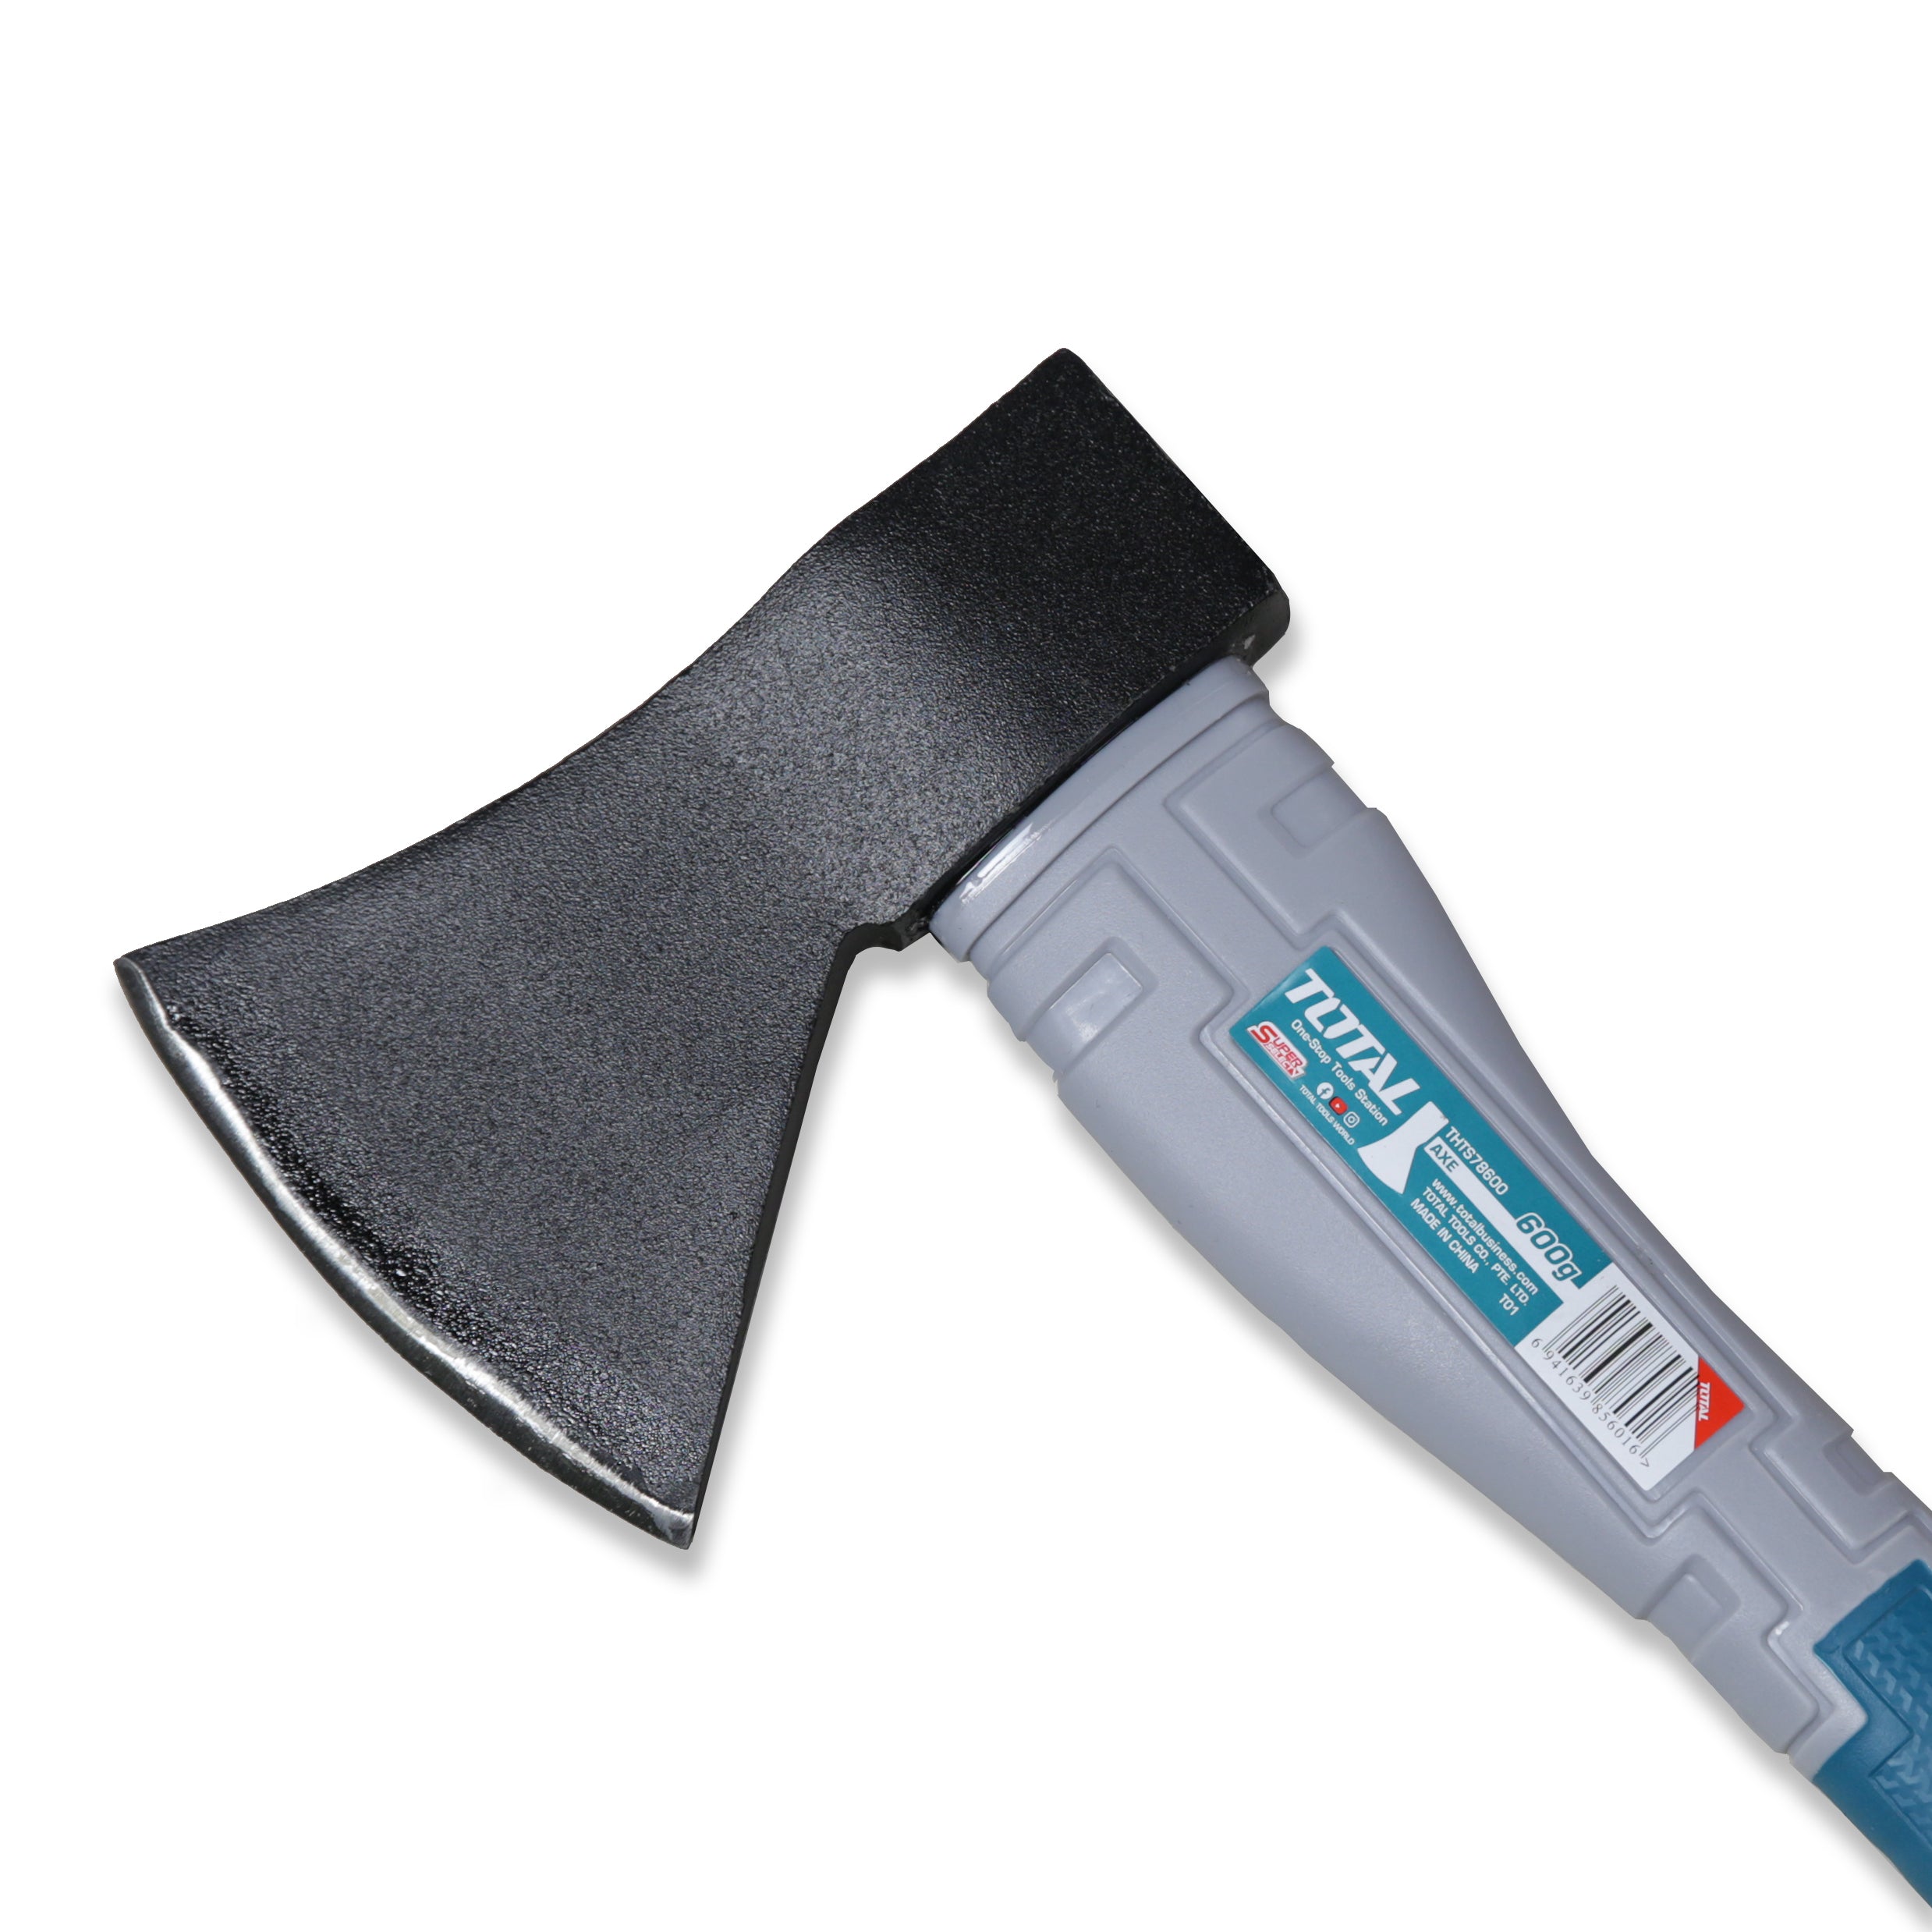 Total Super Select Axe 600g - THTS78600